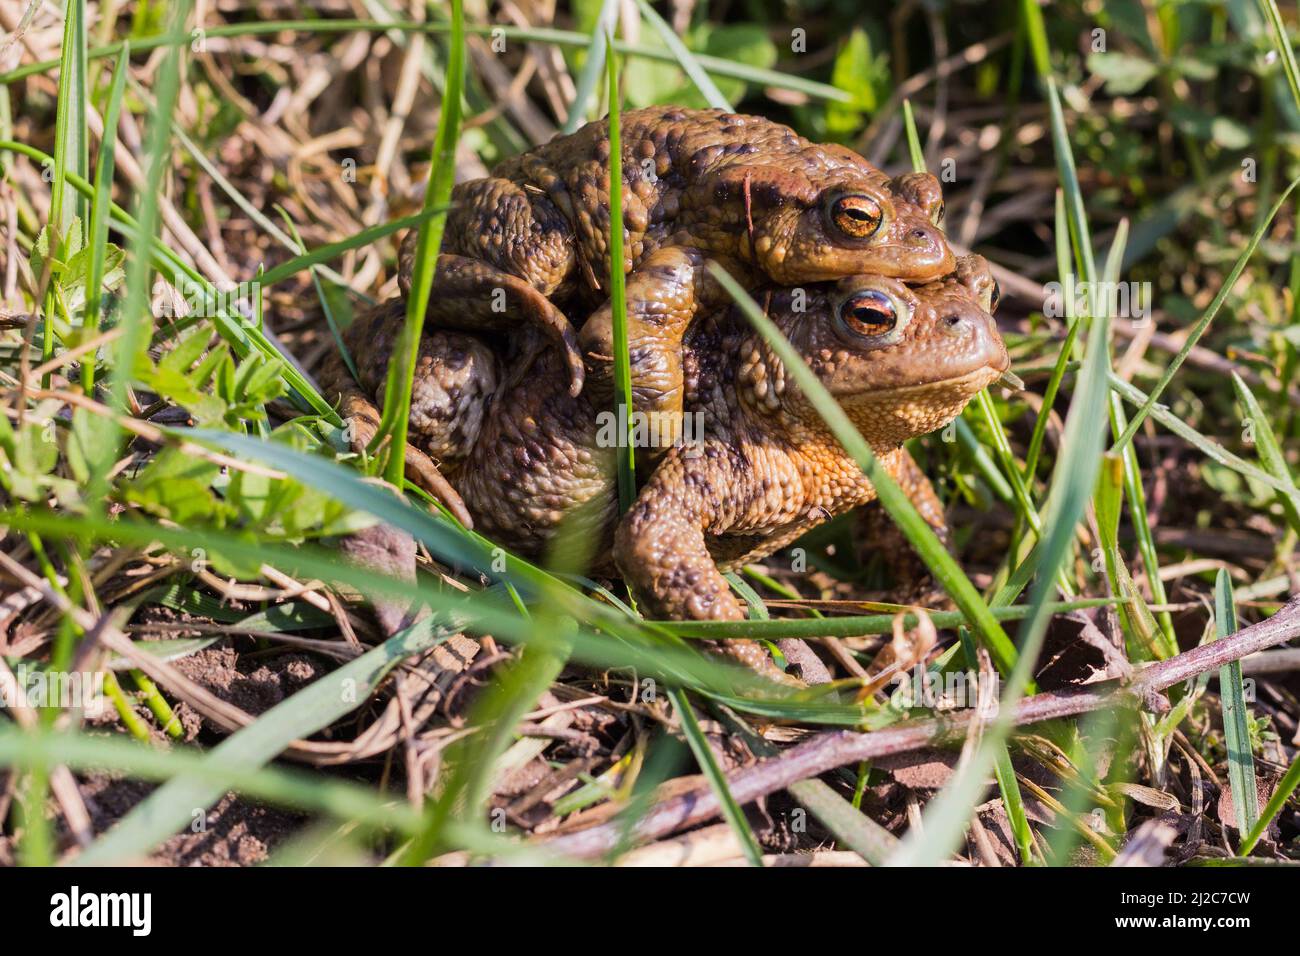 Mating Common Toad (Bufo Bufo) couple in a Grass Stock Photo